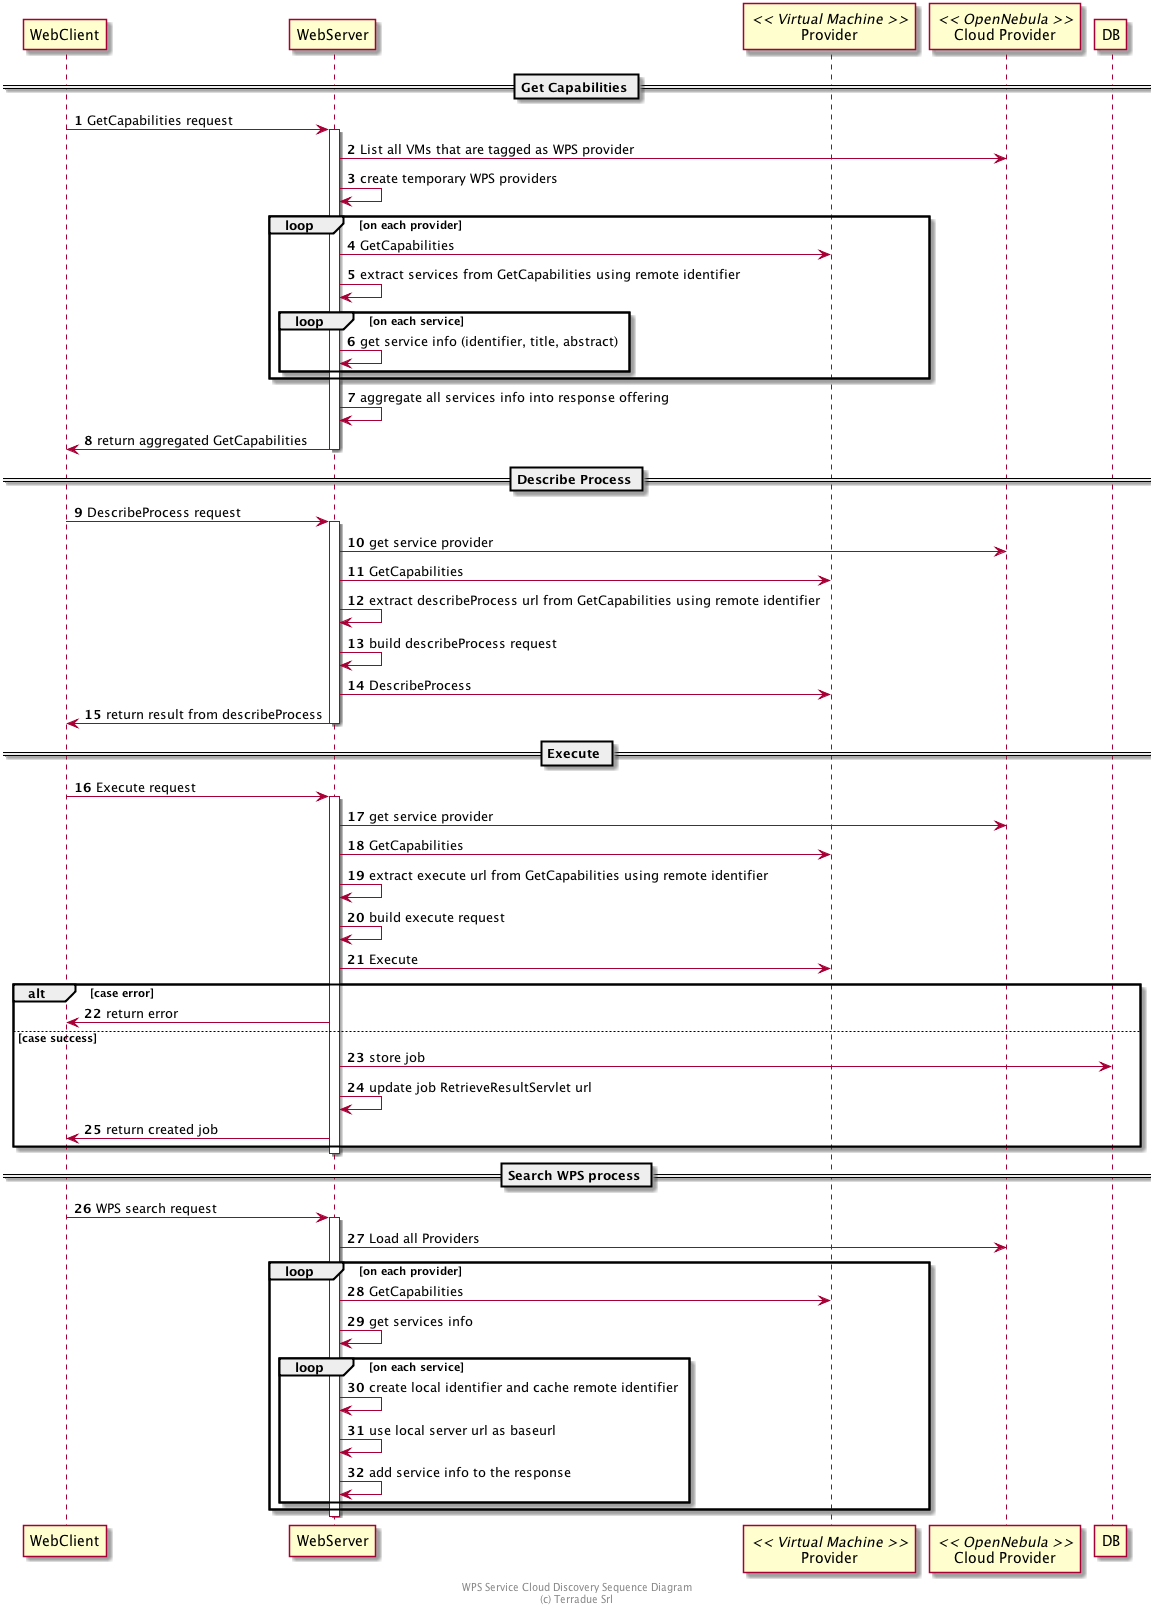 !define DIAG_NAME WPS Service Cloud Discovery Sequence Diagram

participant "WebClient" as WC
participant "WebServer" as WS
participant "Provider" as P << Virtual Machine >>
participant "Cloud Provider" as C << OpenNebula >>

autonumber

== Get Capabilities ==

WC -> WS: GetCapabilities request
activate WS
WS -> C: List all VMs that are tagged as WPS provider
WS -> WS: create temporary WPS providers
loop on each provider
    WS -> P: GetCapabilities
    WS -> WS: extract services from GetCapabilities using remote identifier
    loop on each service
        WS -> WS: get service info (identifier, title, abstract)
    end
end
WS -> WS: aggregate all services info into response offering
WS -> WC: return aggregated GetCapabilities
deactivate WS

== Describe Process ==

WC -> WS: DescribeProcess request
activate WS
WS -> C: get service provider
WS -> P: GetCapabilities
WS -> WS: extract describeProcess url from GetCapabilities using remote identifier
WS -> WS: build describeProcess request
WS -> P: DescribeProcess
WS -> WC: return result from describeProcess
deactivate WS

== Execute ==

WC -> WS: Execute request
activate WS
WS -> C: get service provider
WS -> P: GetCapabilities
WS -> WS: extract execute url from GetCapabilities using remote identifier
WS -> WS: build execute request
WS -> P: Execute
alt case error
    WS -> WC: return error
else case success
    WS -> DB: store job
    WS -> WS: update job RetrieveResultServlet url
    WS -> WC: return created job
end
deactivate WS

== Search WPS process ==

WC -> WS: WPS search request
activate WS
WS -> C: Load all Providers
loop on each provider
    WS -> P: GetCapabilities
    WS -> WS: get services info
    loop on each service
        WS -> WS: create local identifier and cache remote identifier
        WS -> WS: use local server url as baseurl
        WS -> WS: add service info to the response
    end
end
deactivate WS


footer
DIAG_NAME
(c) Terradue Srl
endfooter